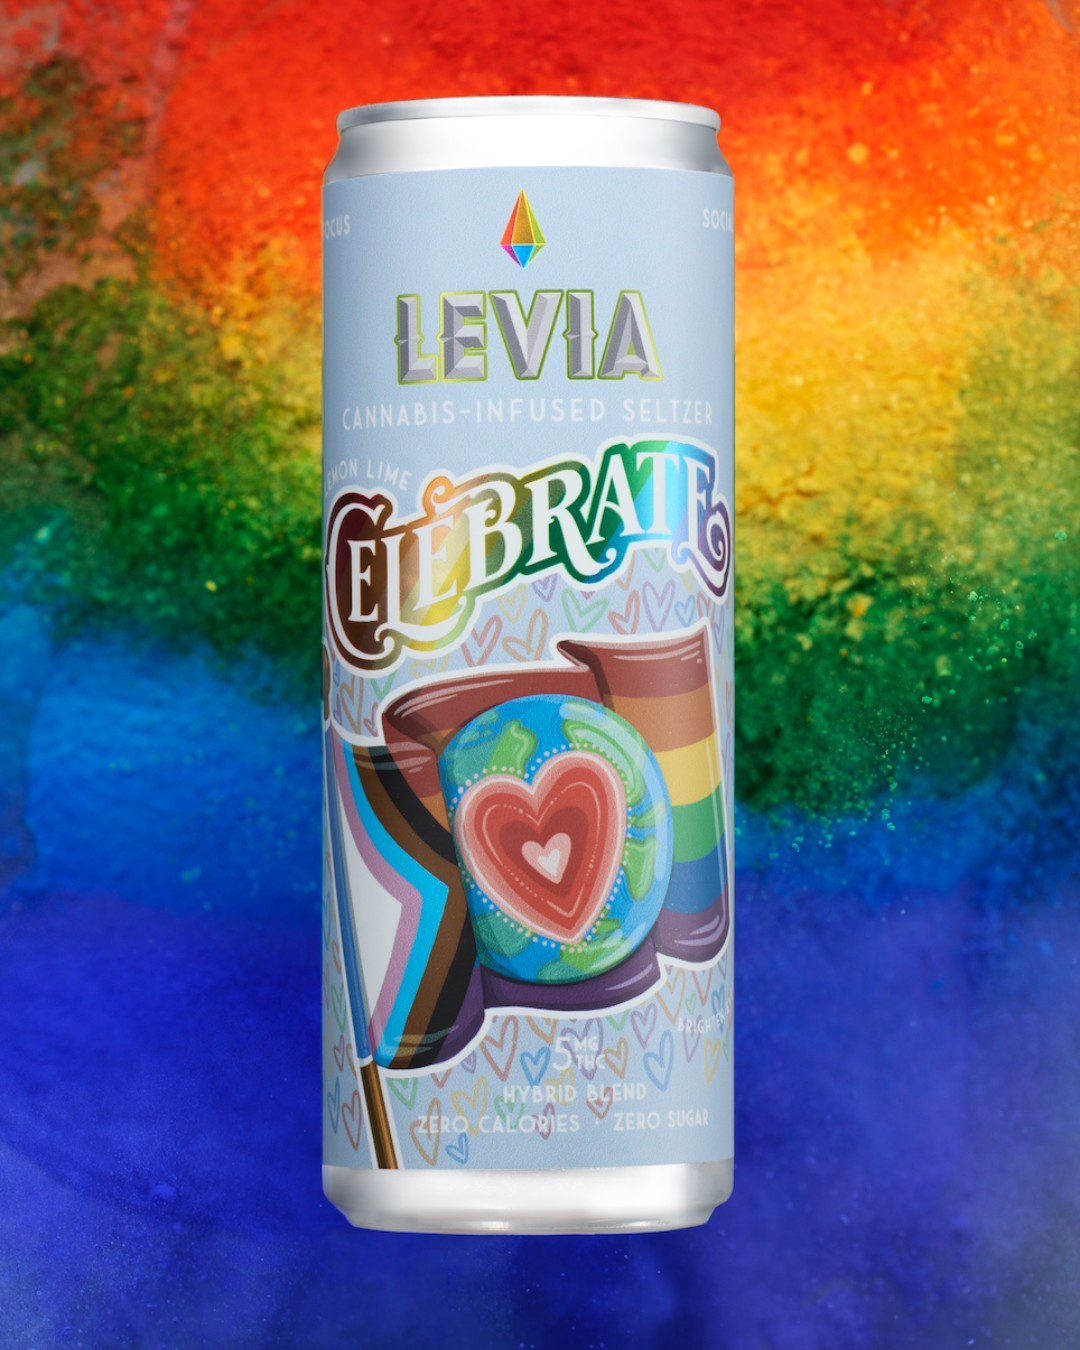 Happy #PrideMonth! We are proud to announce the debut of our latest limited-edition offering, in honor of PRIDE month. Hitting shelves throughout Massachusetts for the month of June, the limited-edition pride can features original artwork from @haileybonia of @flourishartistic.In addition, we will be making a donation to @transemergencyfund during their Trans Pride: A Celebration of Liberation event. The donation will help provide homeless transgender individuals within the state with temporary housing for a year, accompanied by staff to oversee and support the program by providing resources for members as they work to secure their own employment and housing in the future.Our PRIDE edition mimics the effects of “Celebrate” – an uplifting, elevated experience with our flagship lemon-lime flavor.: @craigcapellophotography